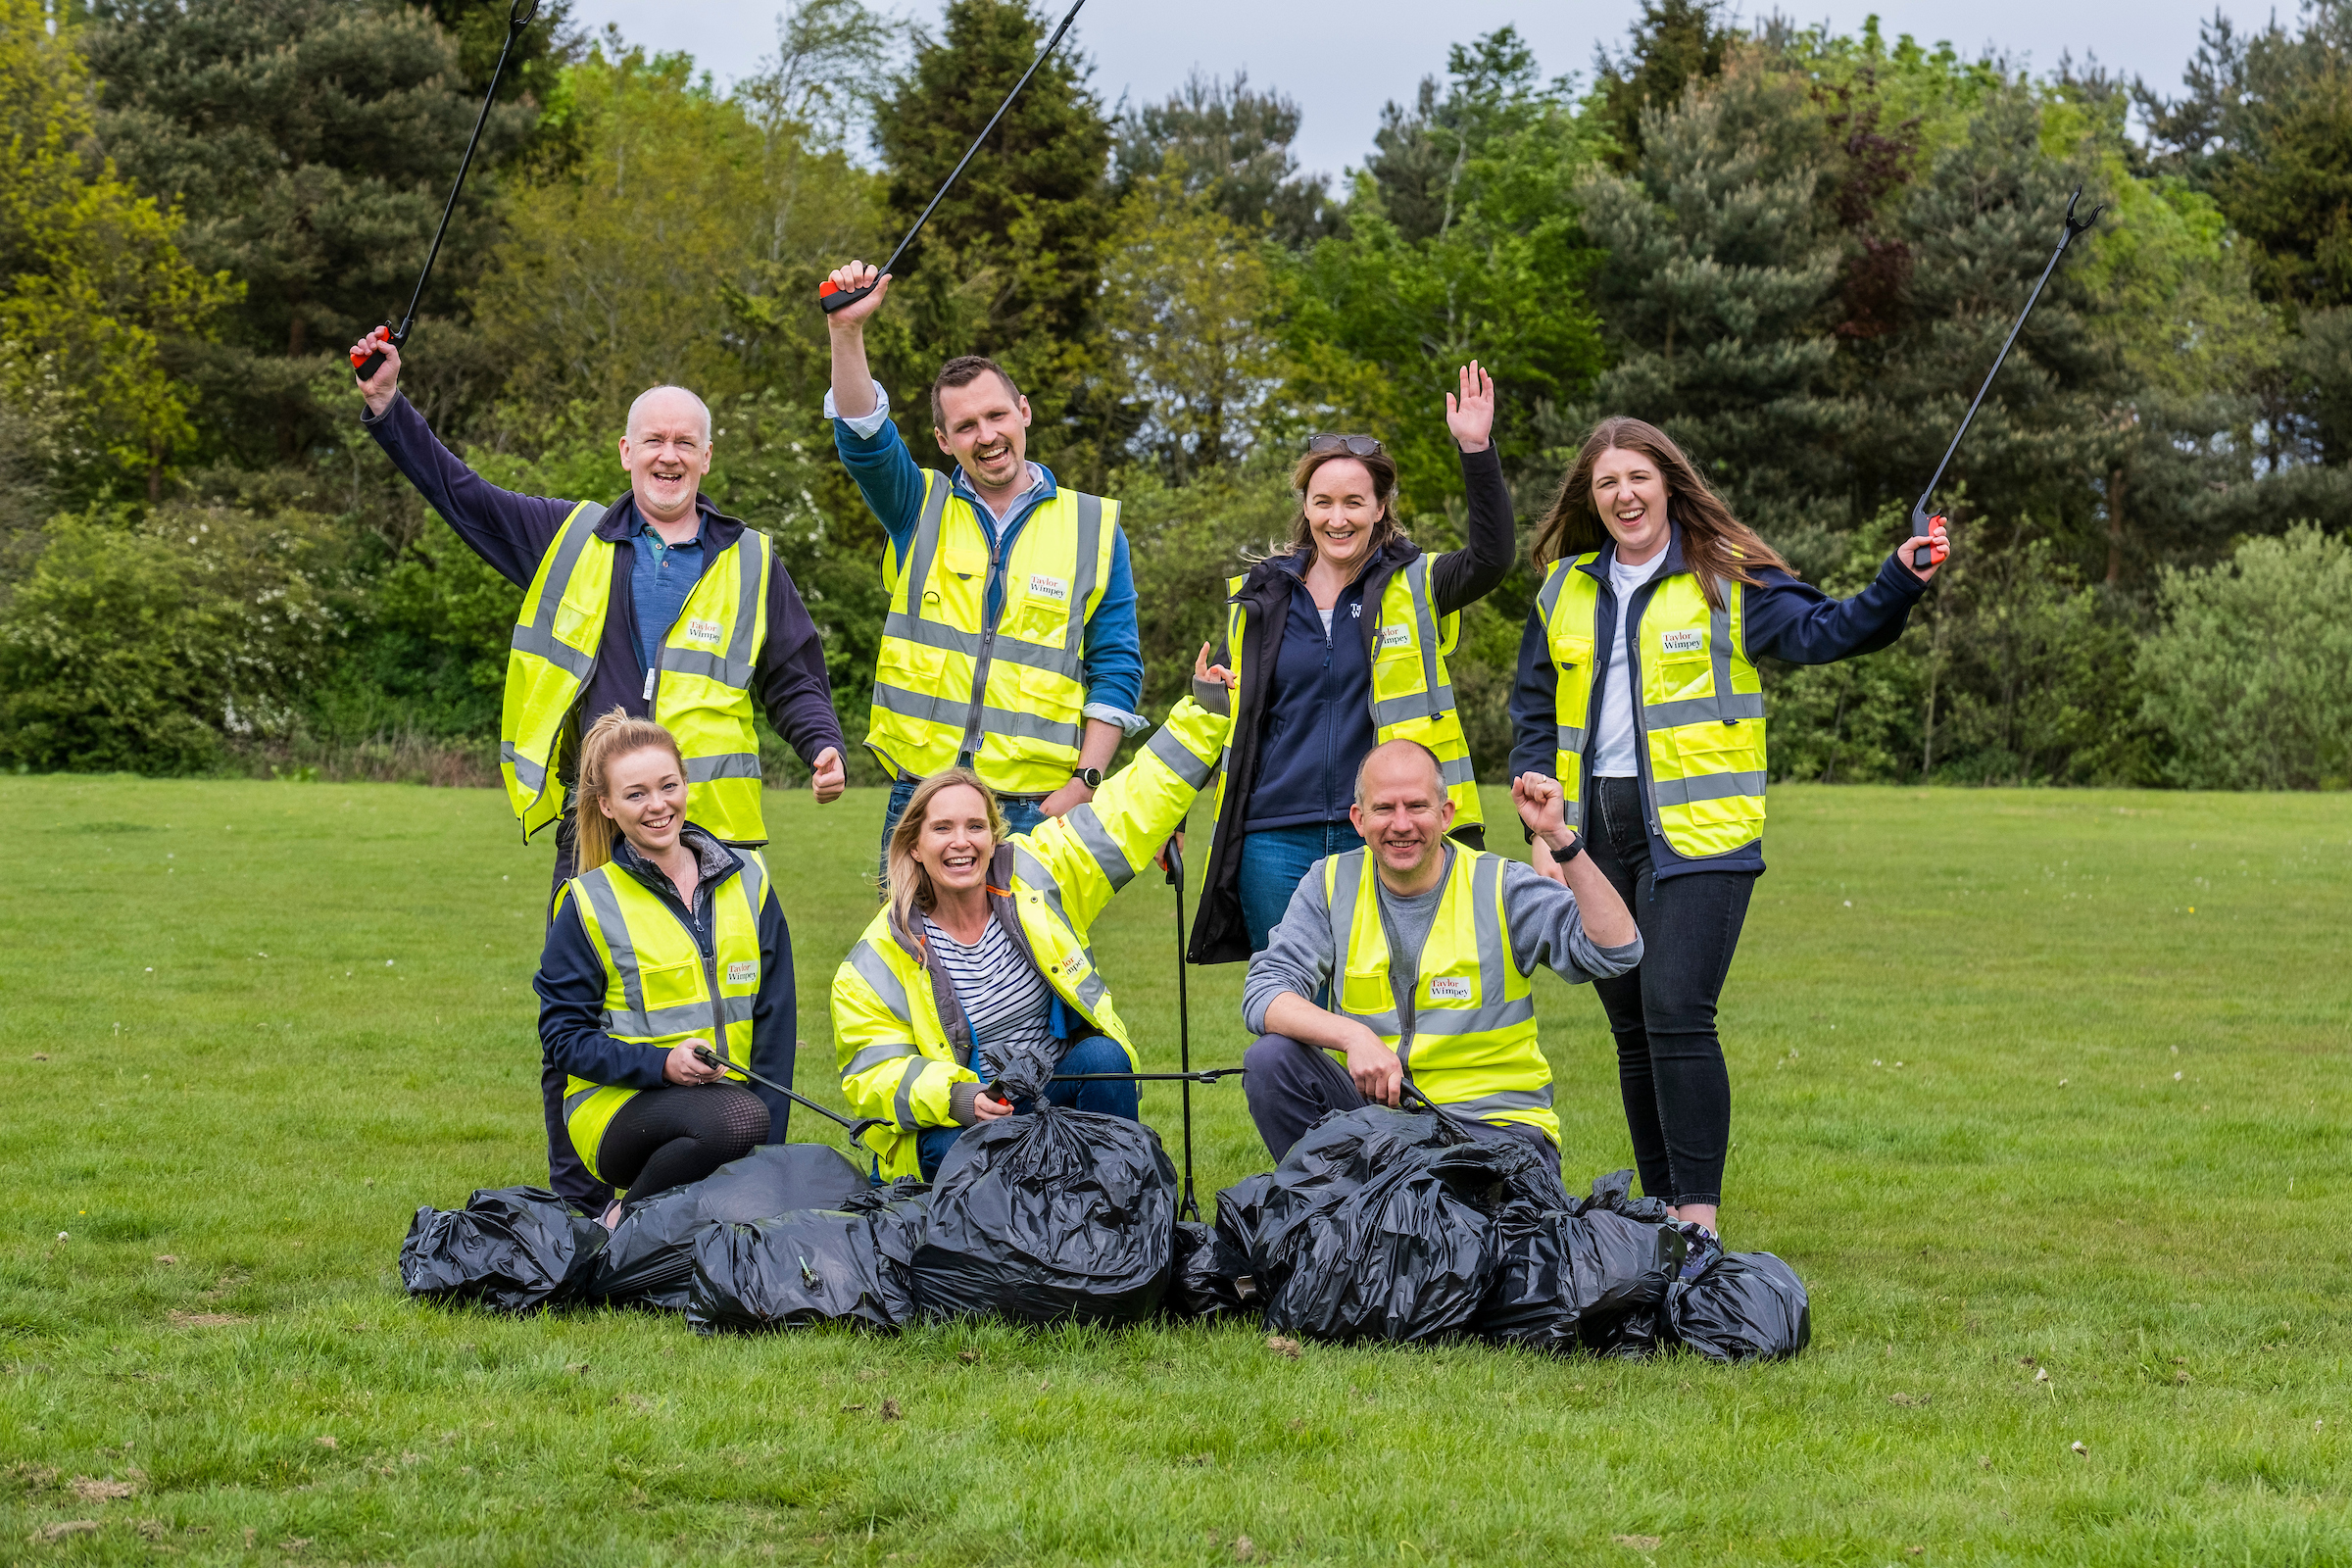 Taylor Wimpey volunteers take part in community clean-up in Fife